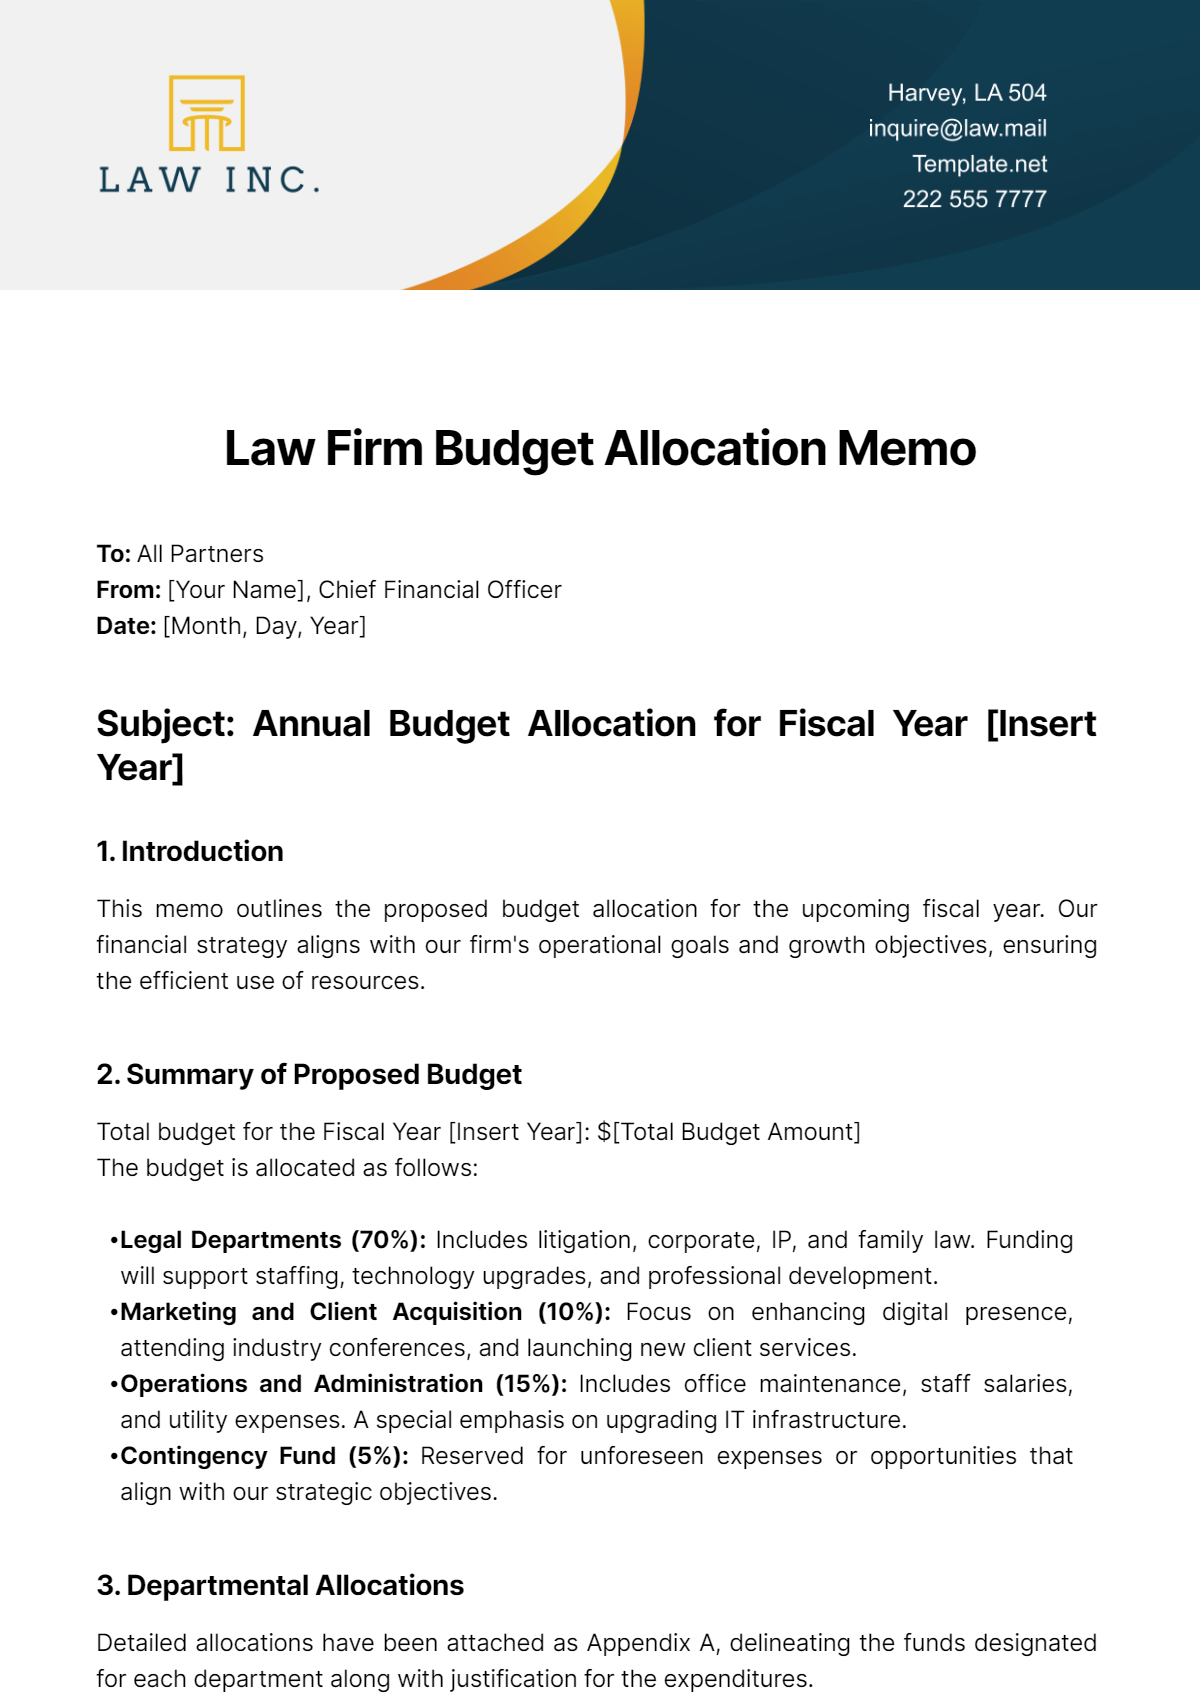 Free Law Firm Budget Allocation Memo Template